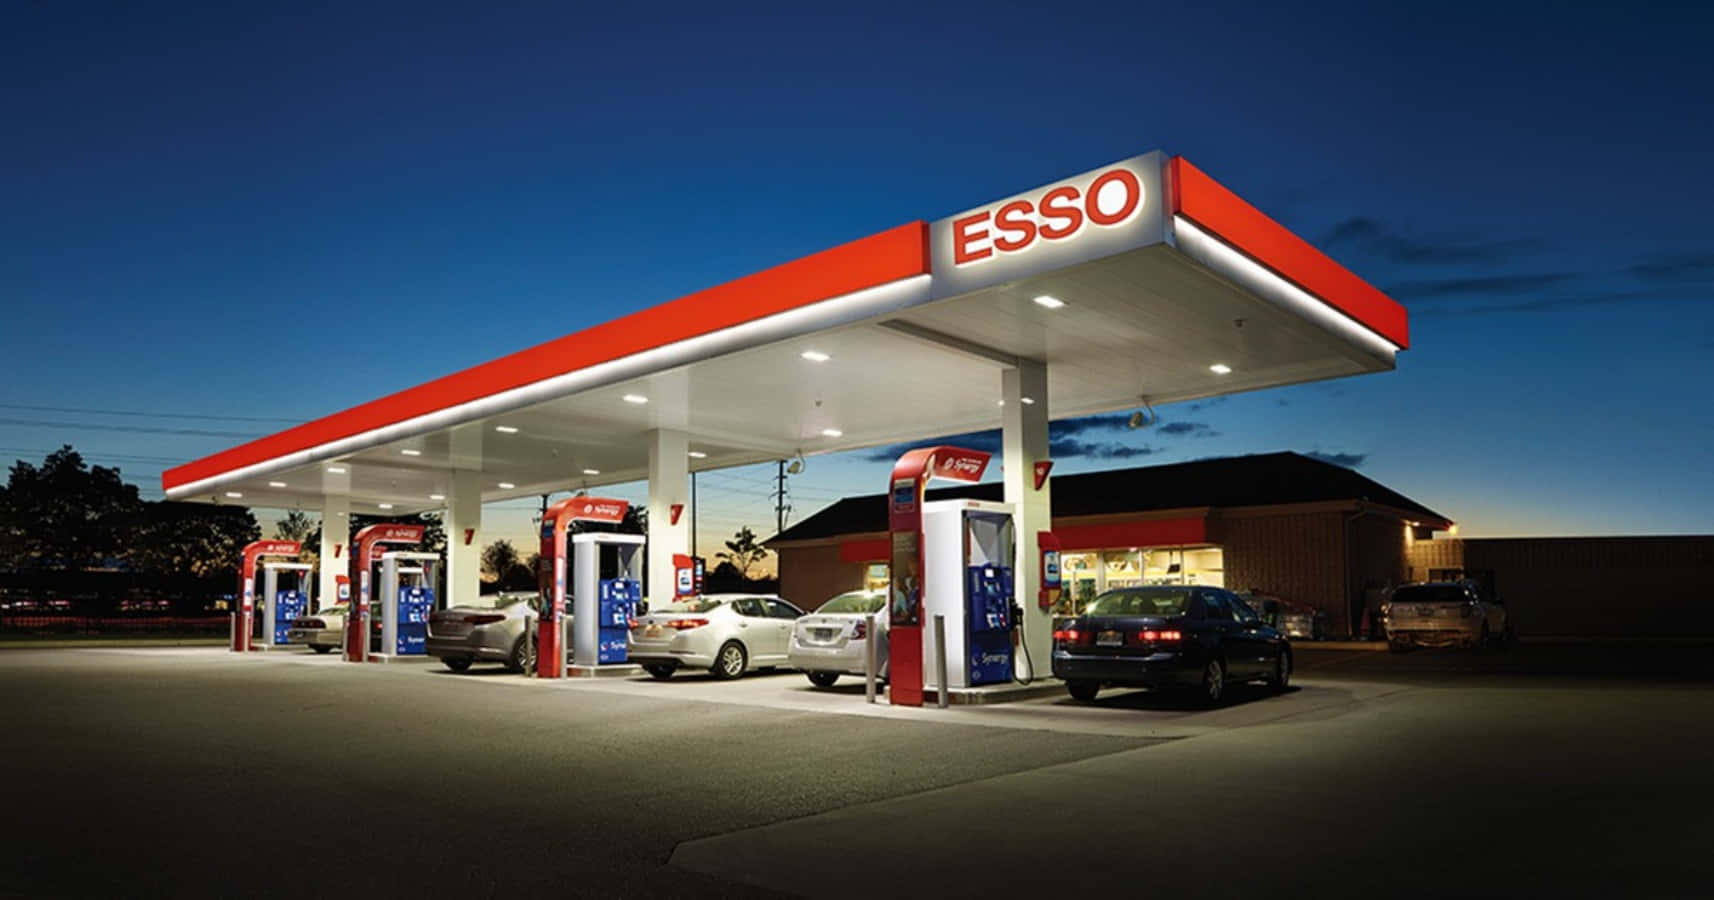 Welcome to the Petrol Station: Get Refueled and Ready to Go!